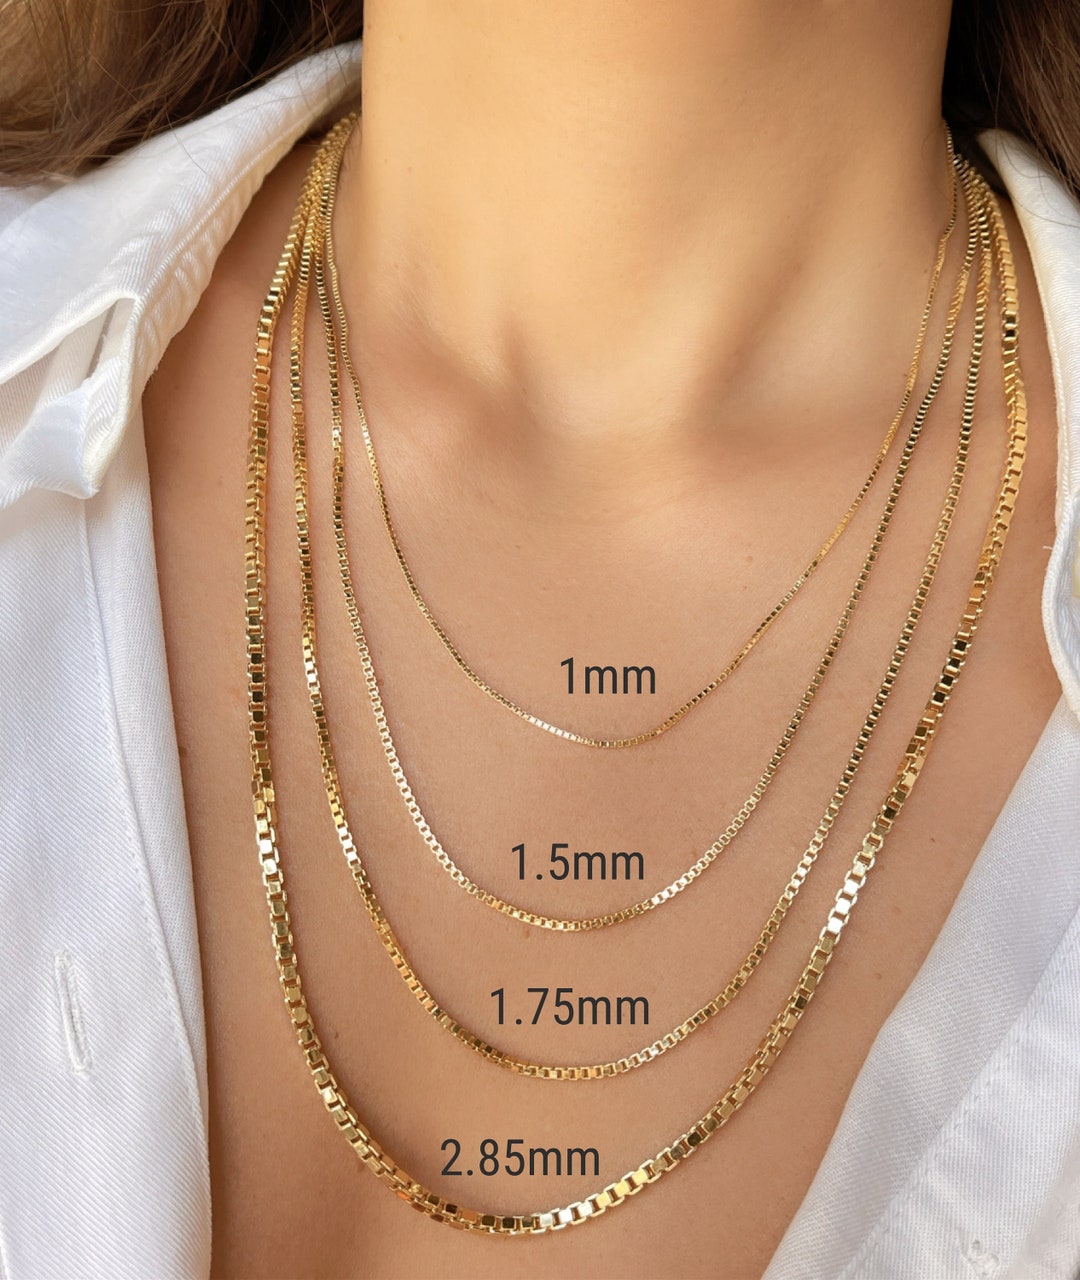 1mm-2.85mm Box Chain Necklace 10K 14K Real Gold Diamond Cut Chain, Dainty  10K 14K Yellow Real Gold Box Link Chain for Men Women 